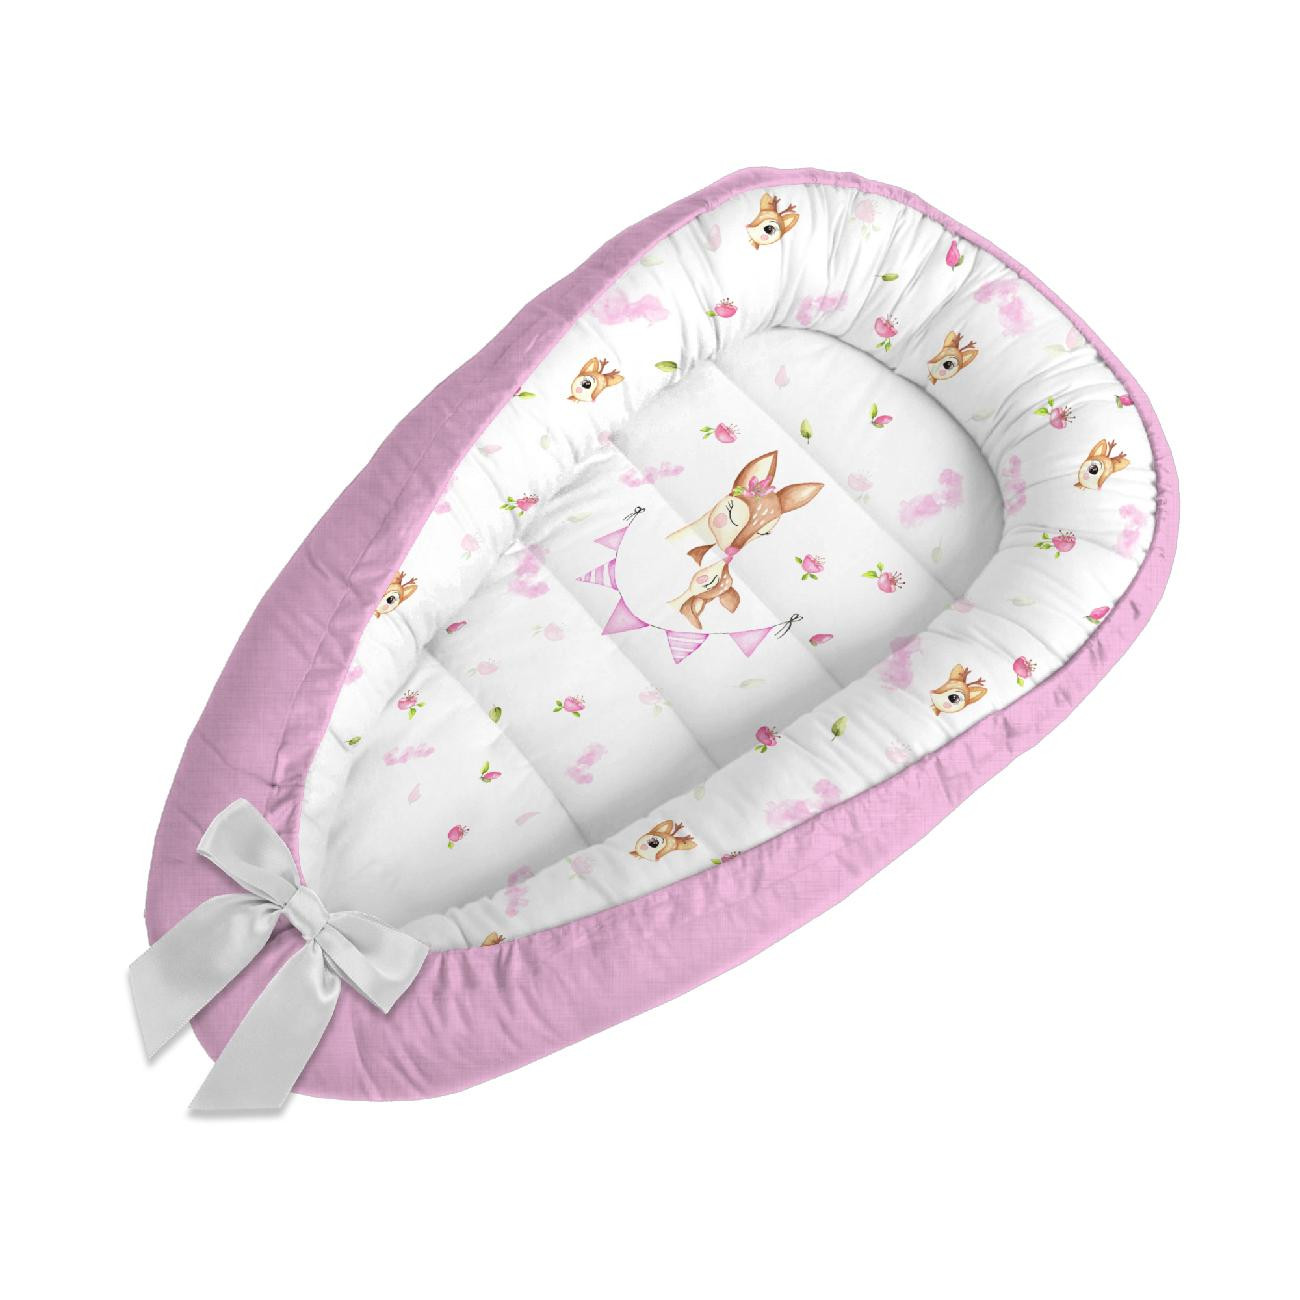 BABY NEST - FAWN / pink - sewing set